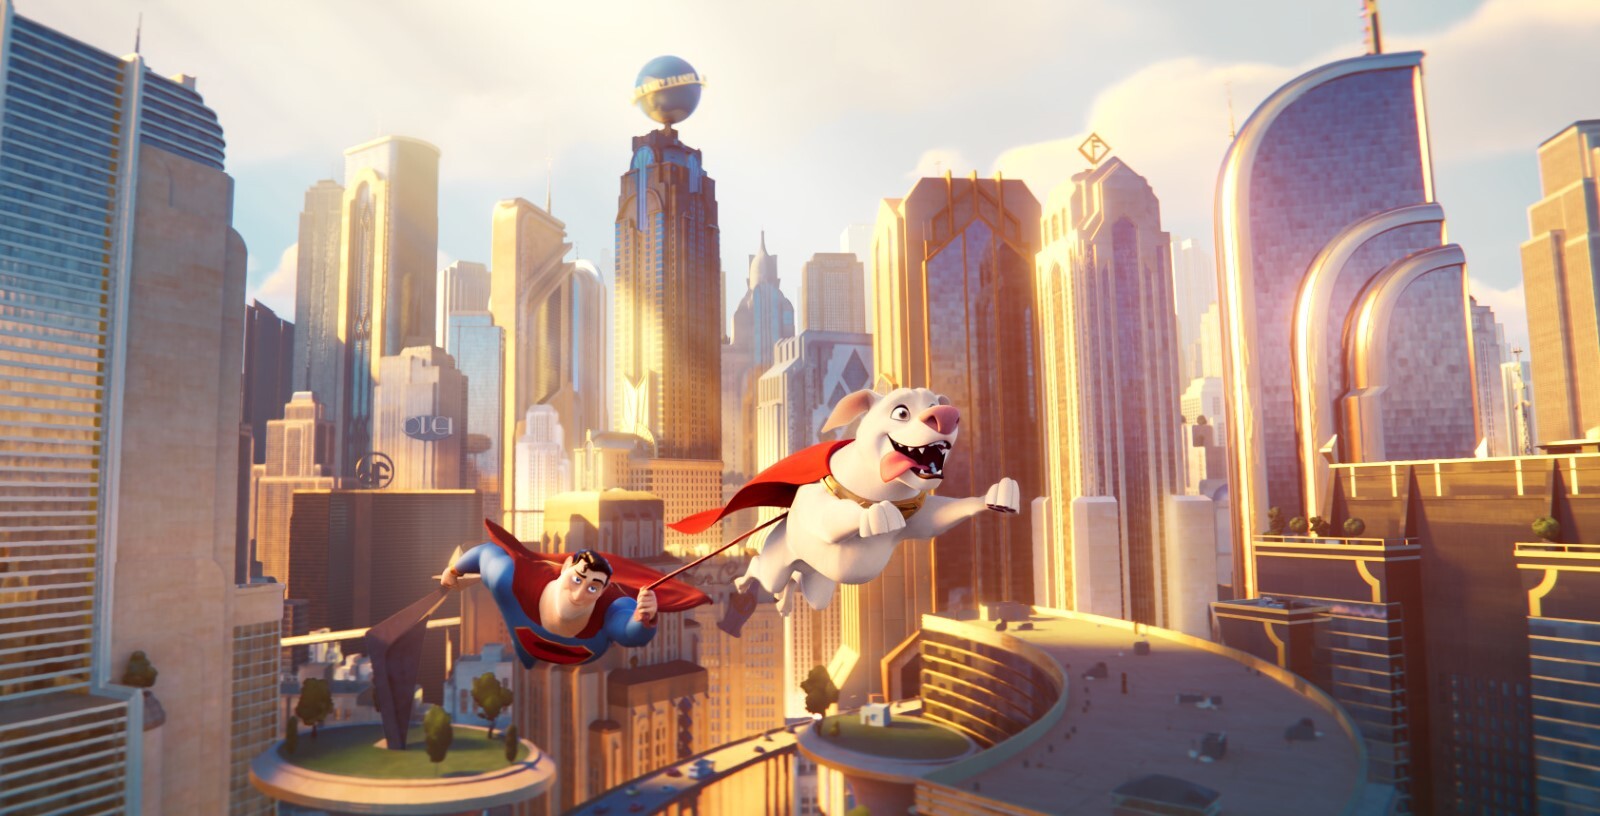 Krypto et les Super-Animaux | Copyright 2022 Warner Bros. Entertainment Inc. All Rights Reserved.